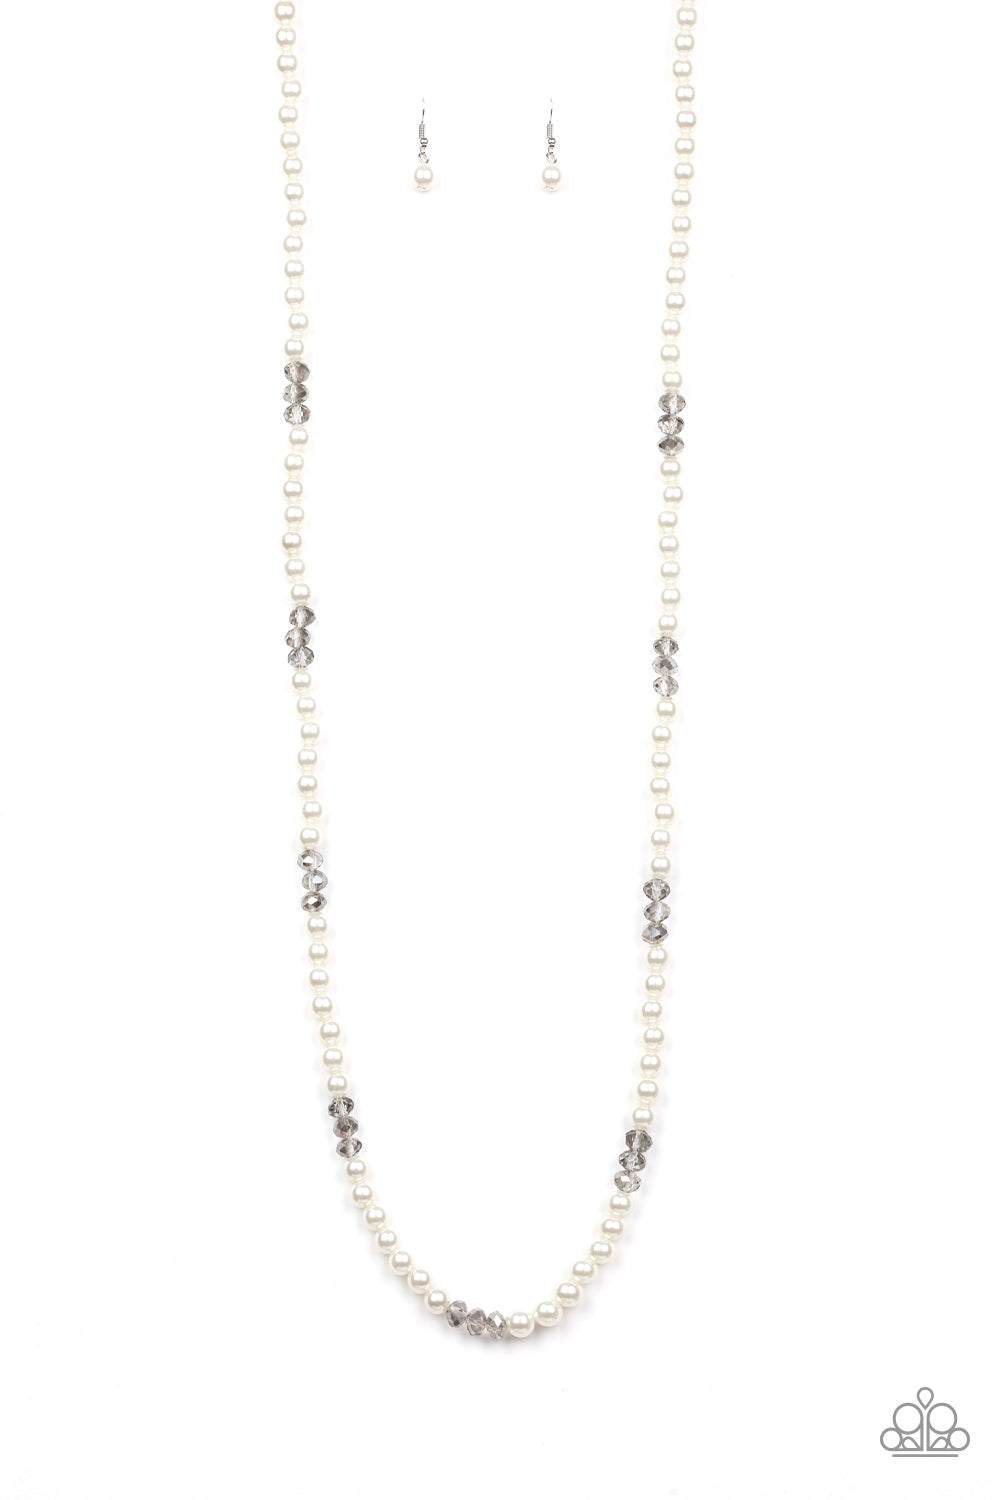 Paparazzi Necklace - Girls Have More FUNDS - White